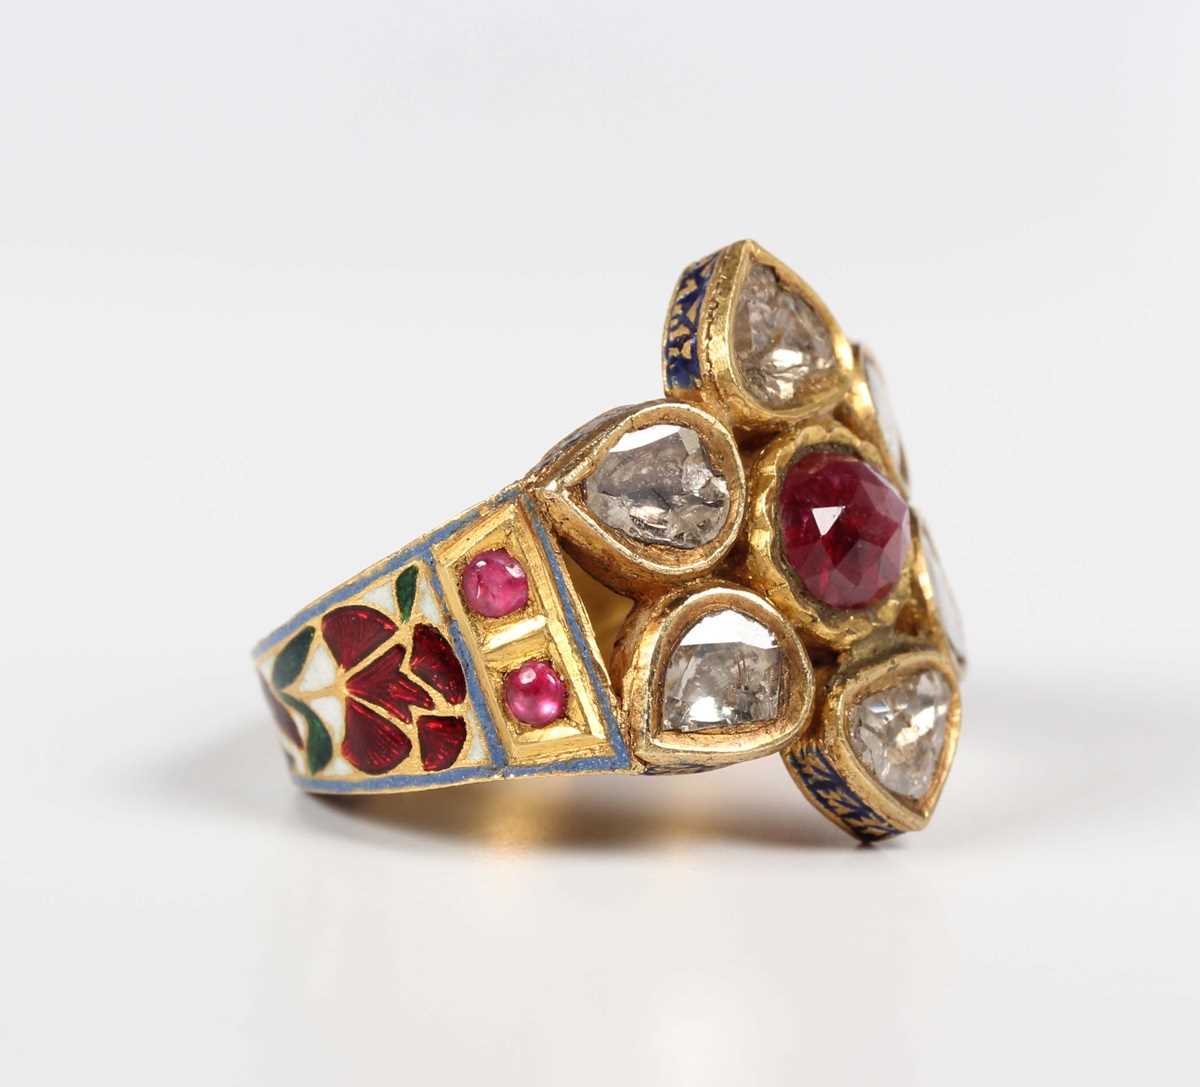 A Middle Eastern gold, ruby, diamond and varicoloured enamelled ring, probably Indian, designed as a